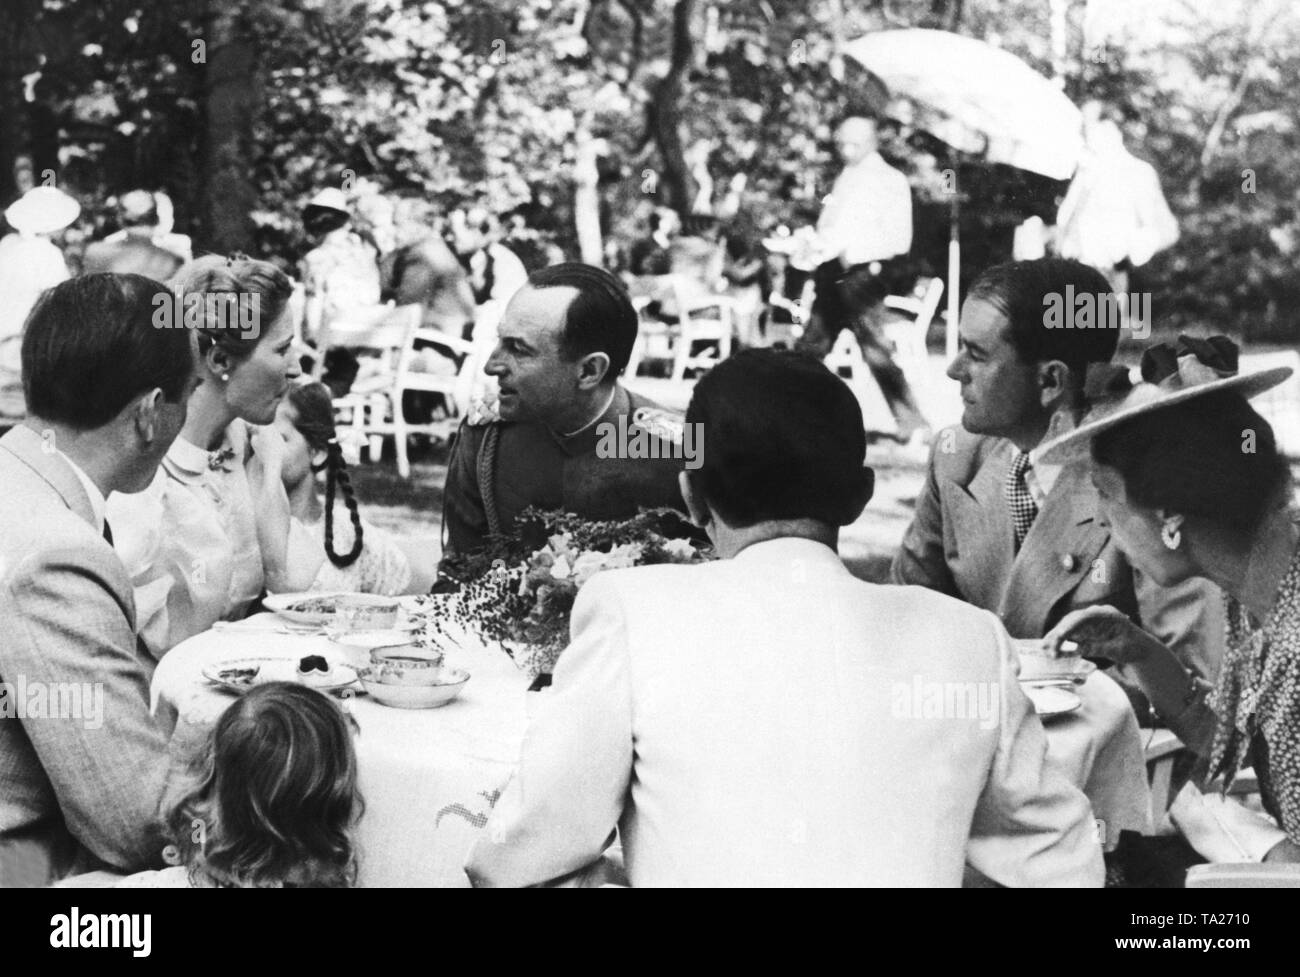 The Prince Regent Paul of Yugoslavia (center) visits Josh Goebbels (with his back to the camera) on his private property on the island of Schwanenwerder. Sitting at the table, the Prince Regent is talking to Magda Goebbels (to the left of him). Also at the table, Albert Speer (2nd from right) and the Prince Regent's wife Olga of Greece (right). Beside Magda and Joseph Goebbels, one of the daughters. Stock Photo